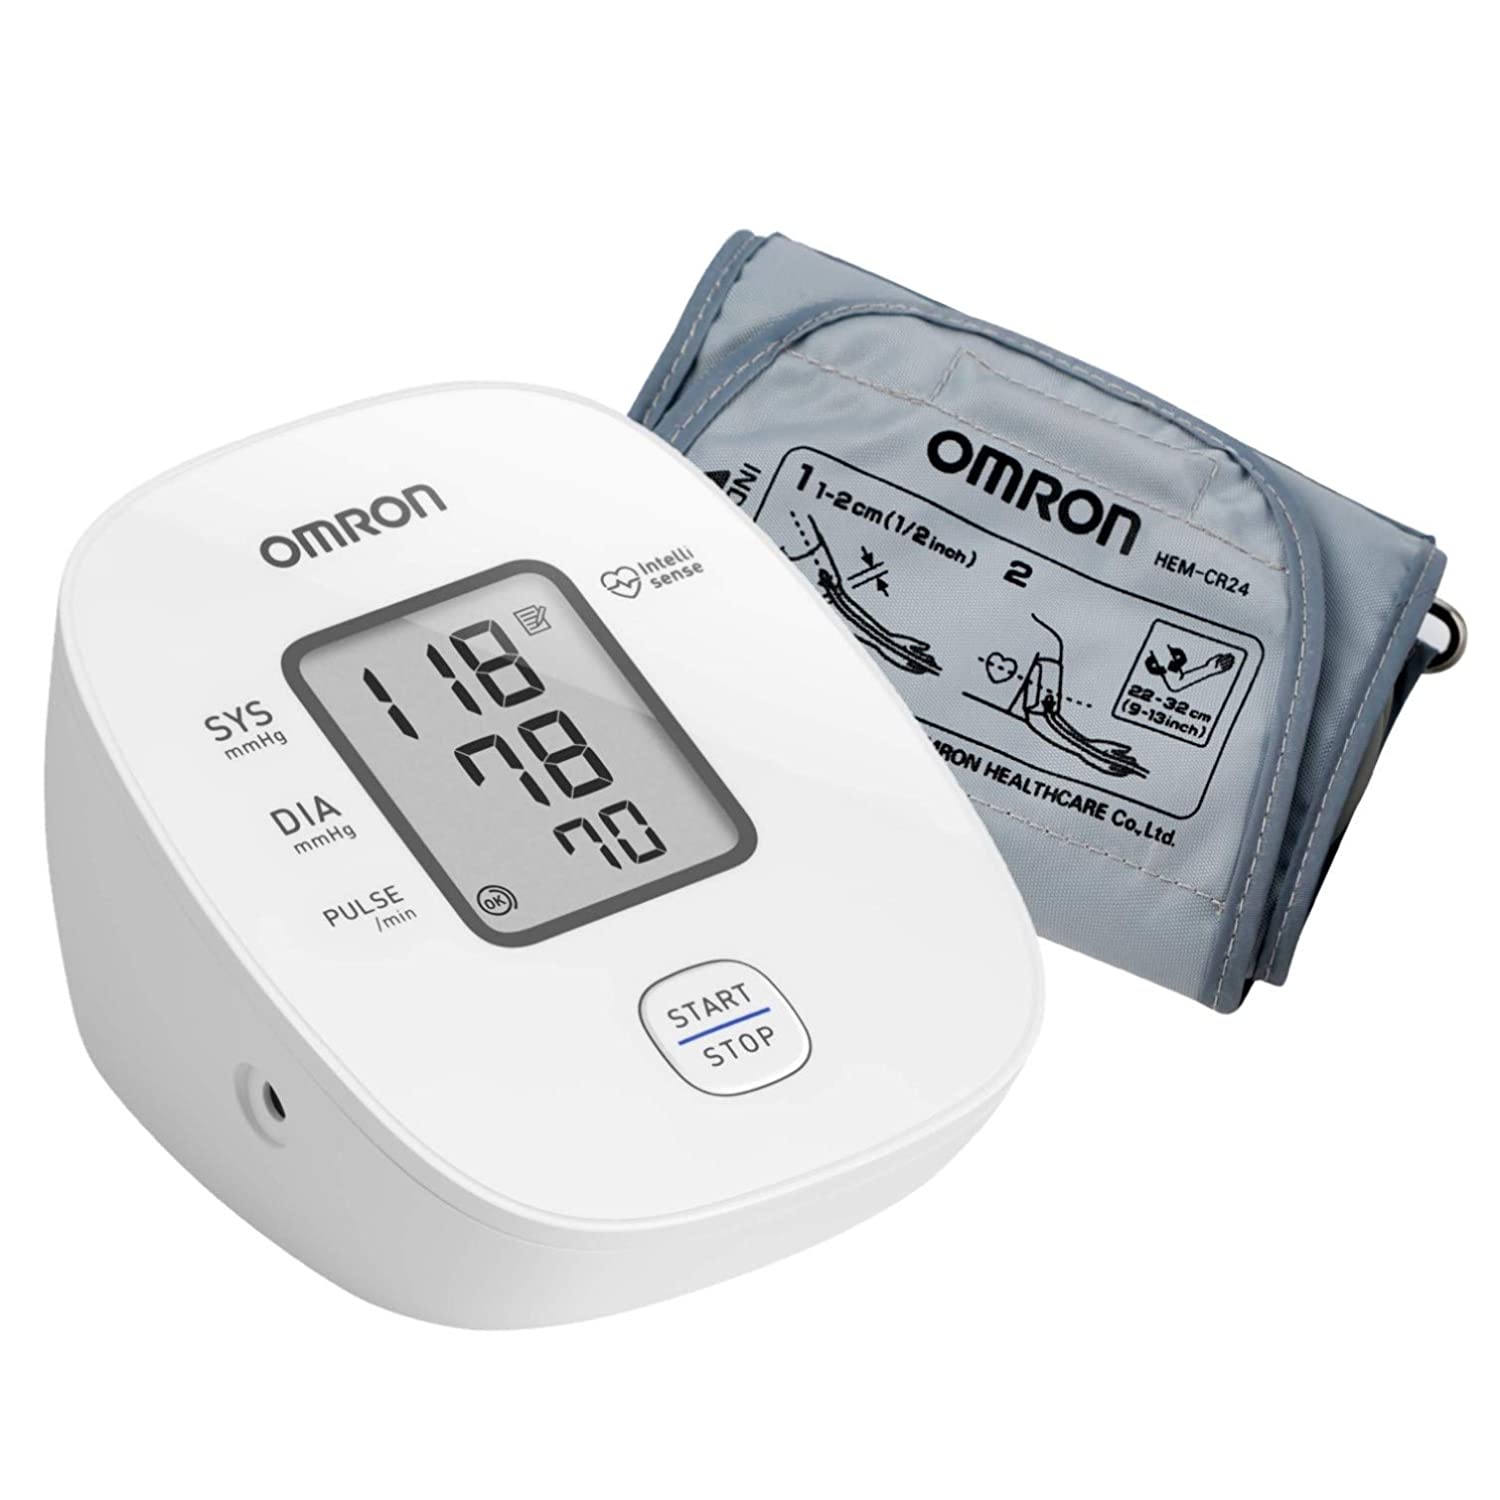 Omron HEM 7121J Fully Automatic Digital Blood Pressure Monitor with Intellisense Technology & Cuff Wrapping Guide for Most Accurate Measurement (White)